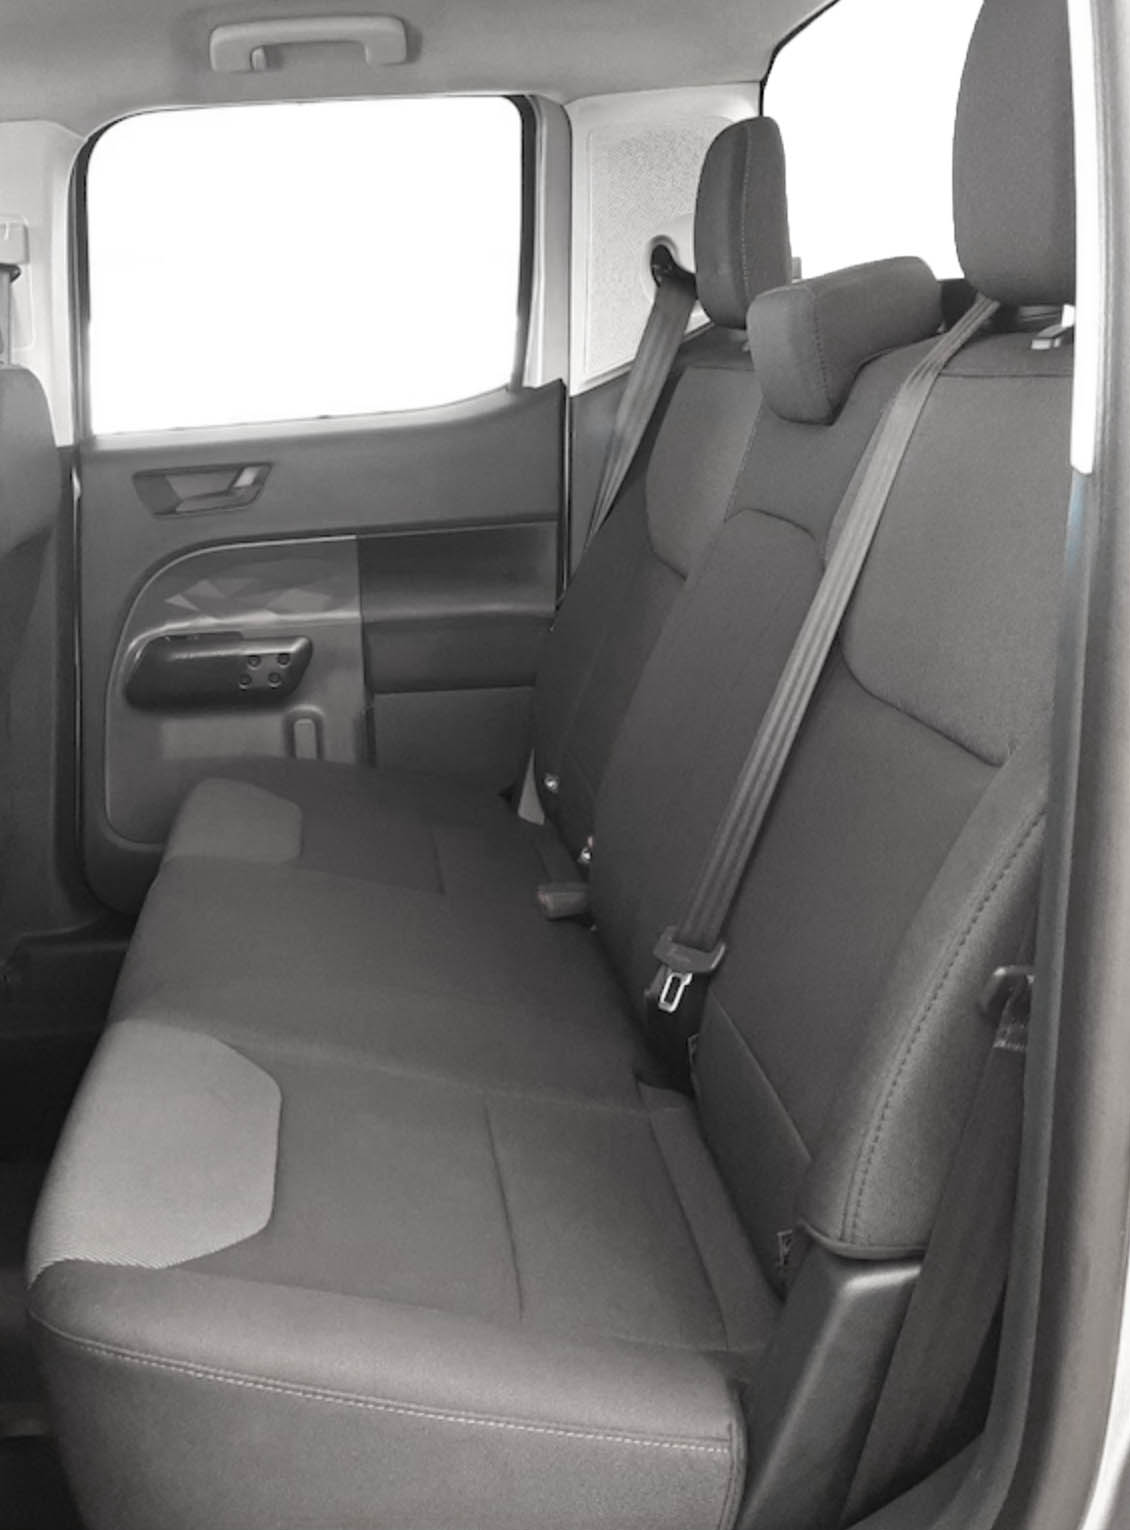 2022+ Ford Maverick – Rear Bench Seat Cover